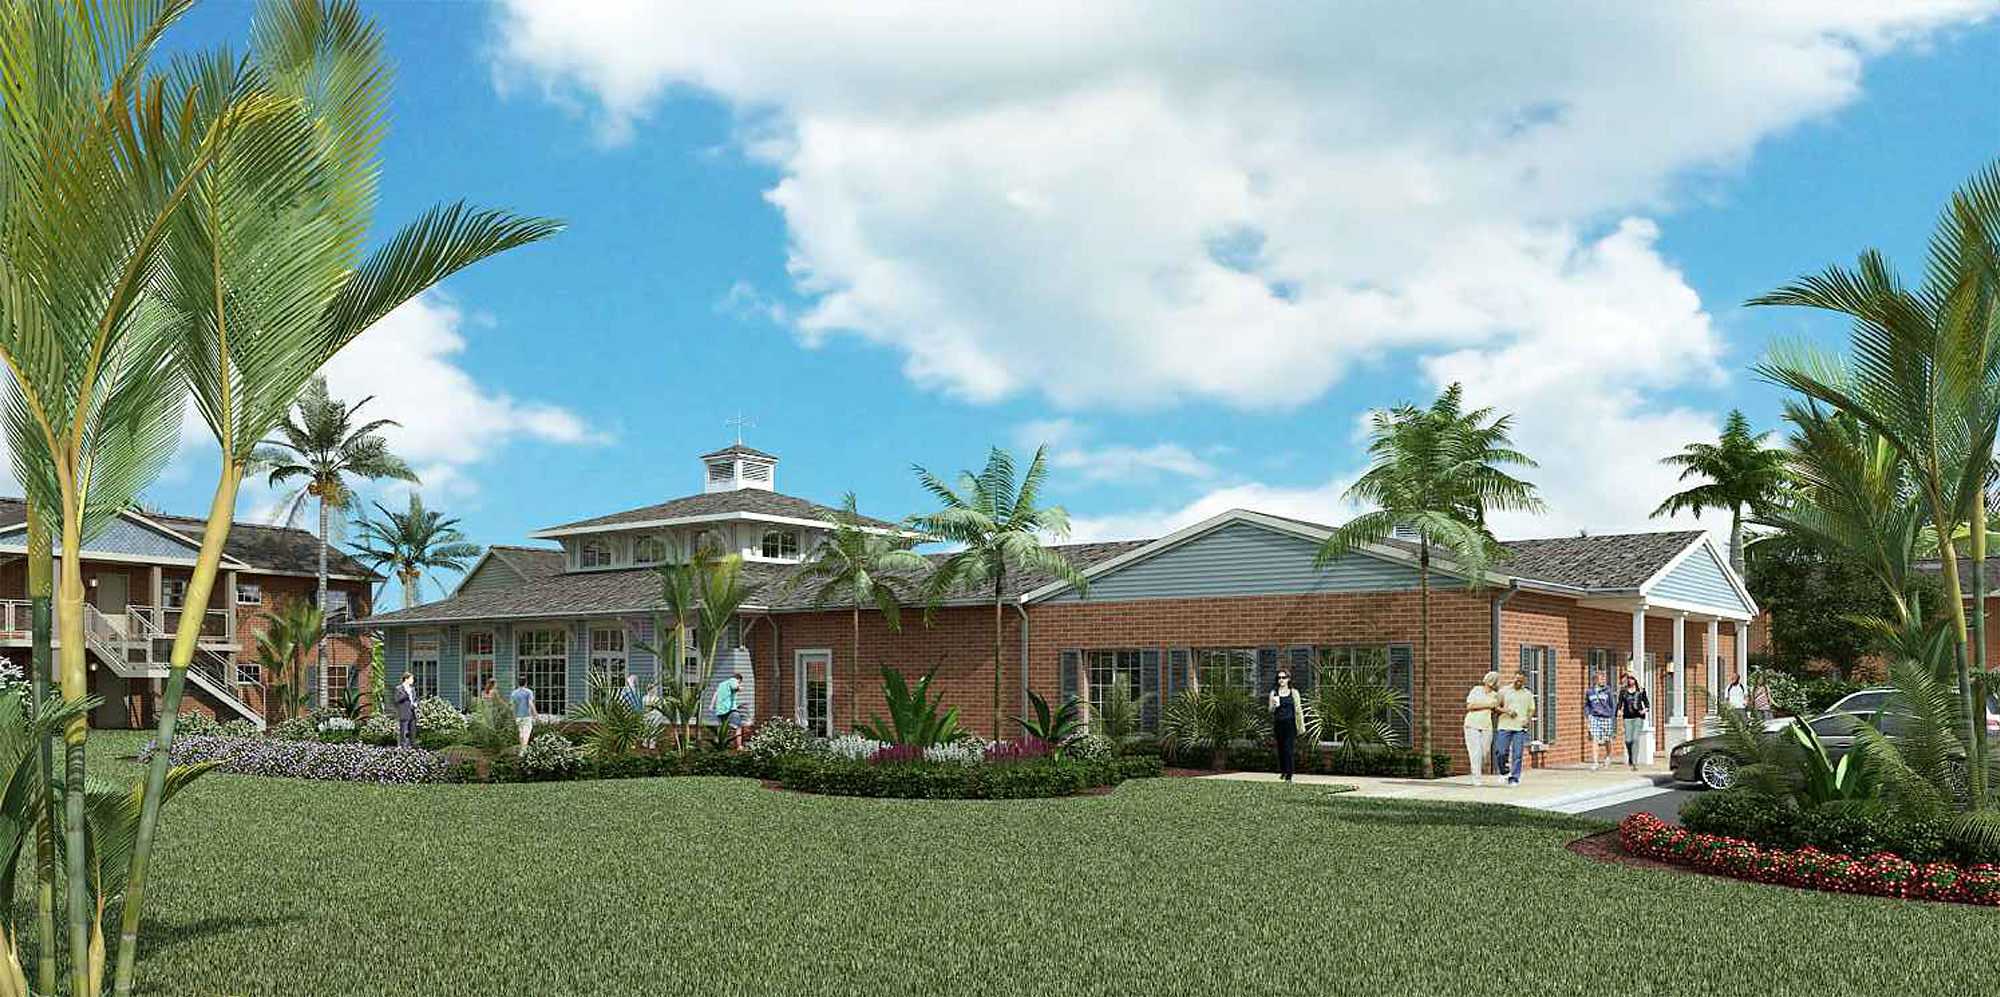 A rendering of a community center planned for Valencia Way, the former Eureka Gardens.